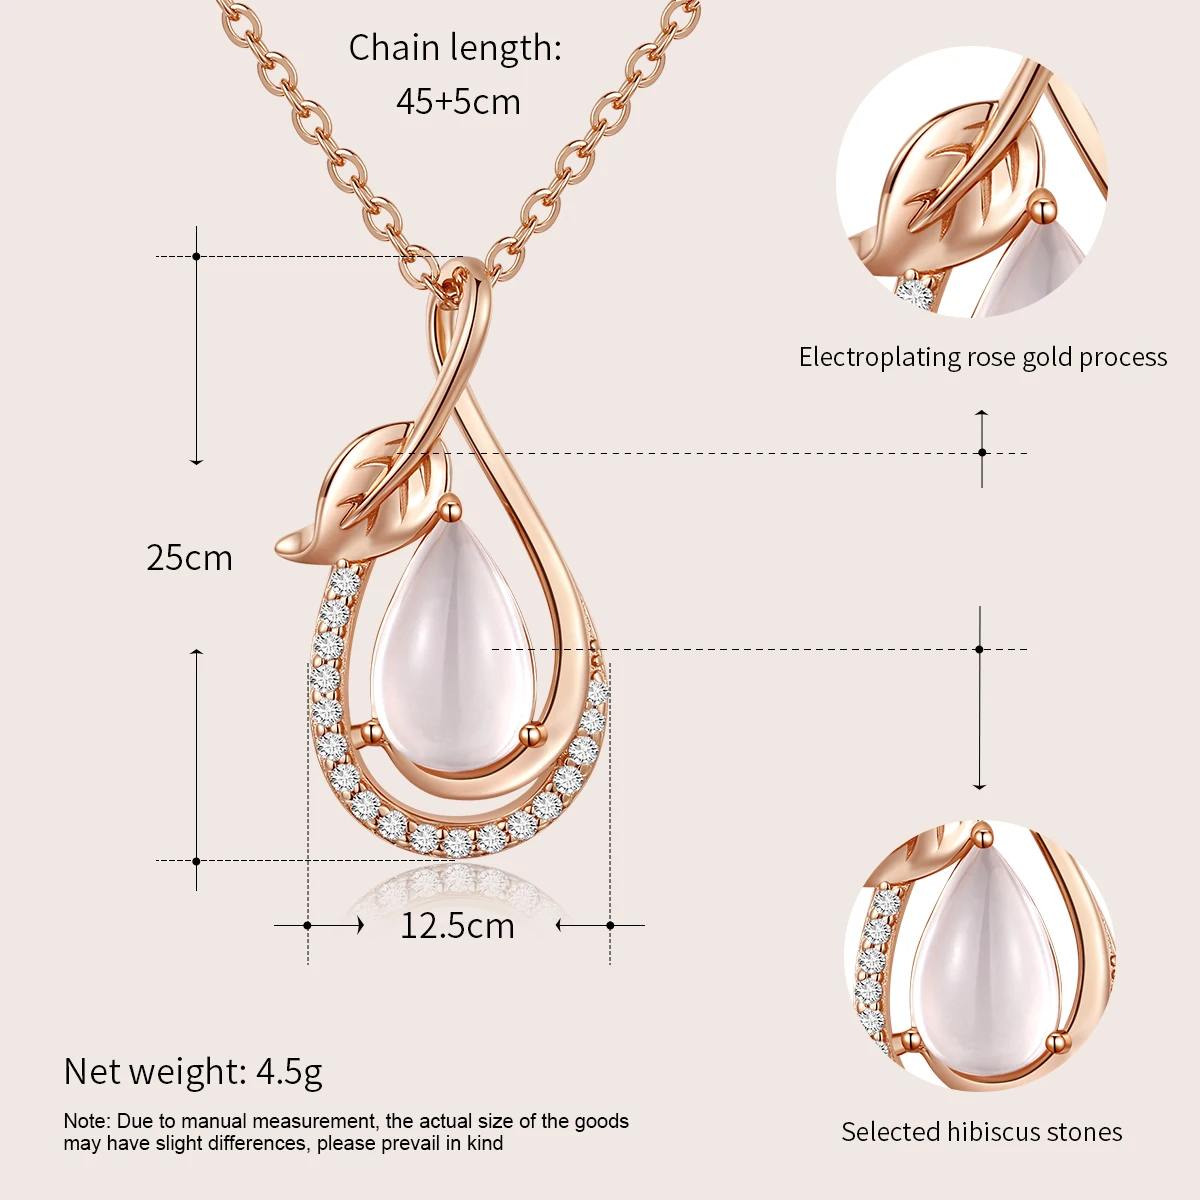 CDE YN1138 Design Patent Silver 925 Jewelry DIY Natural Rose Quartz Necklace Gemstone Rose Gold Plated Sterling Silver Necklace